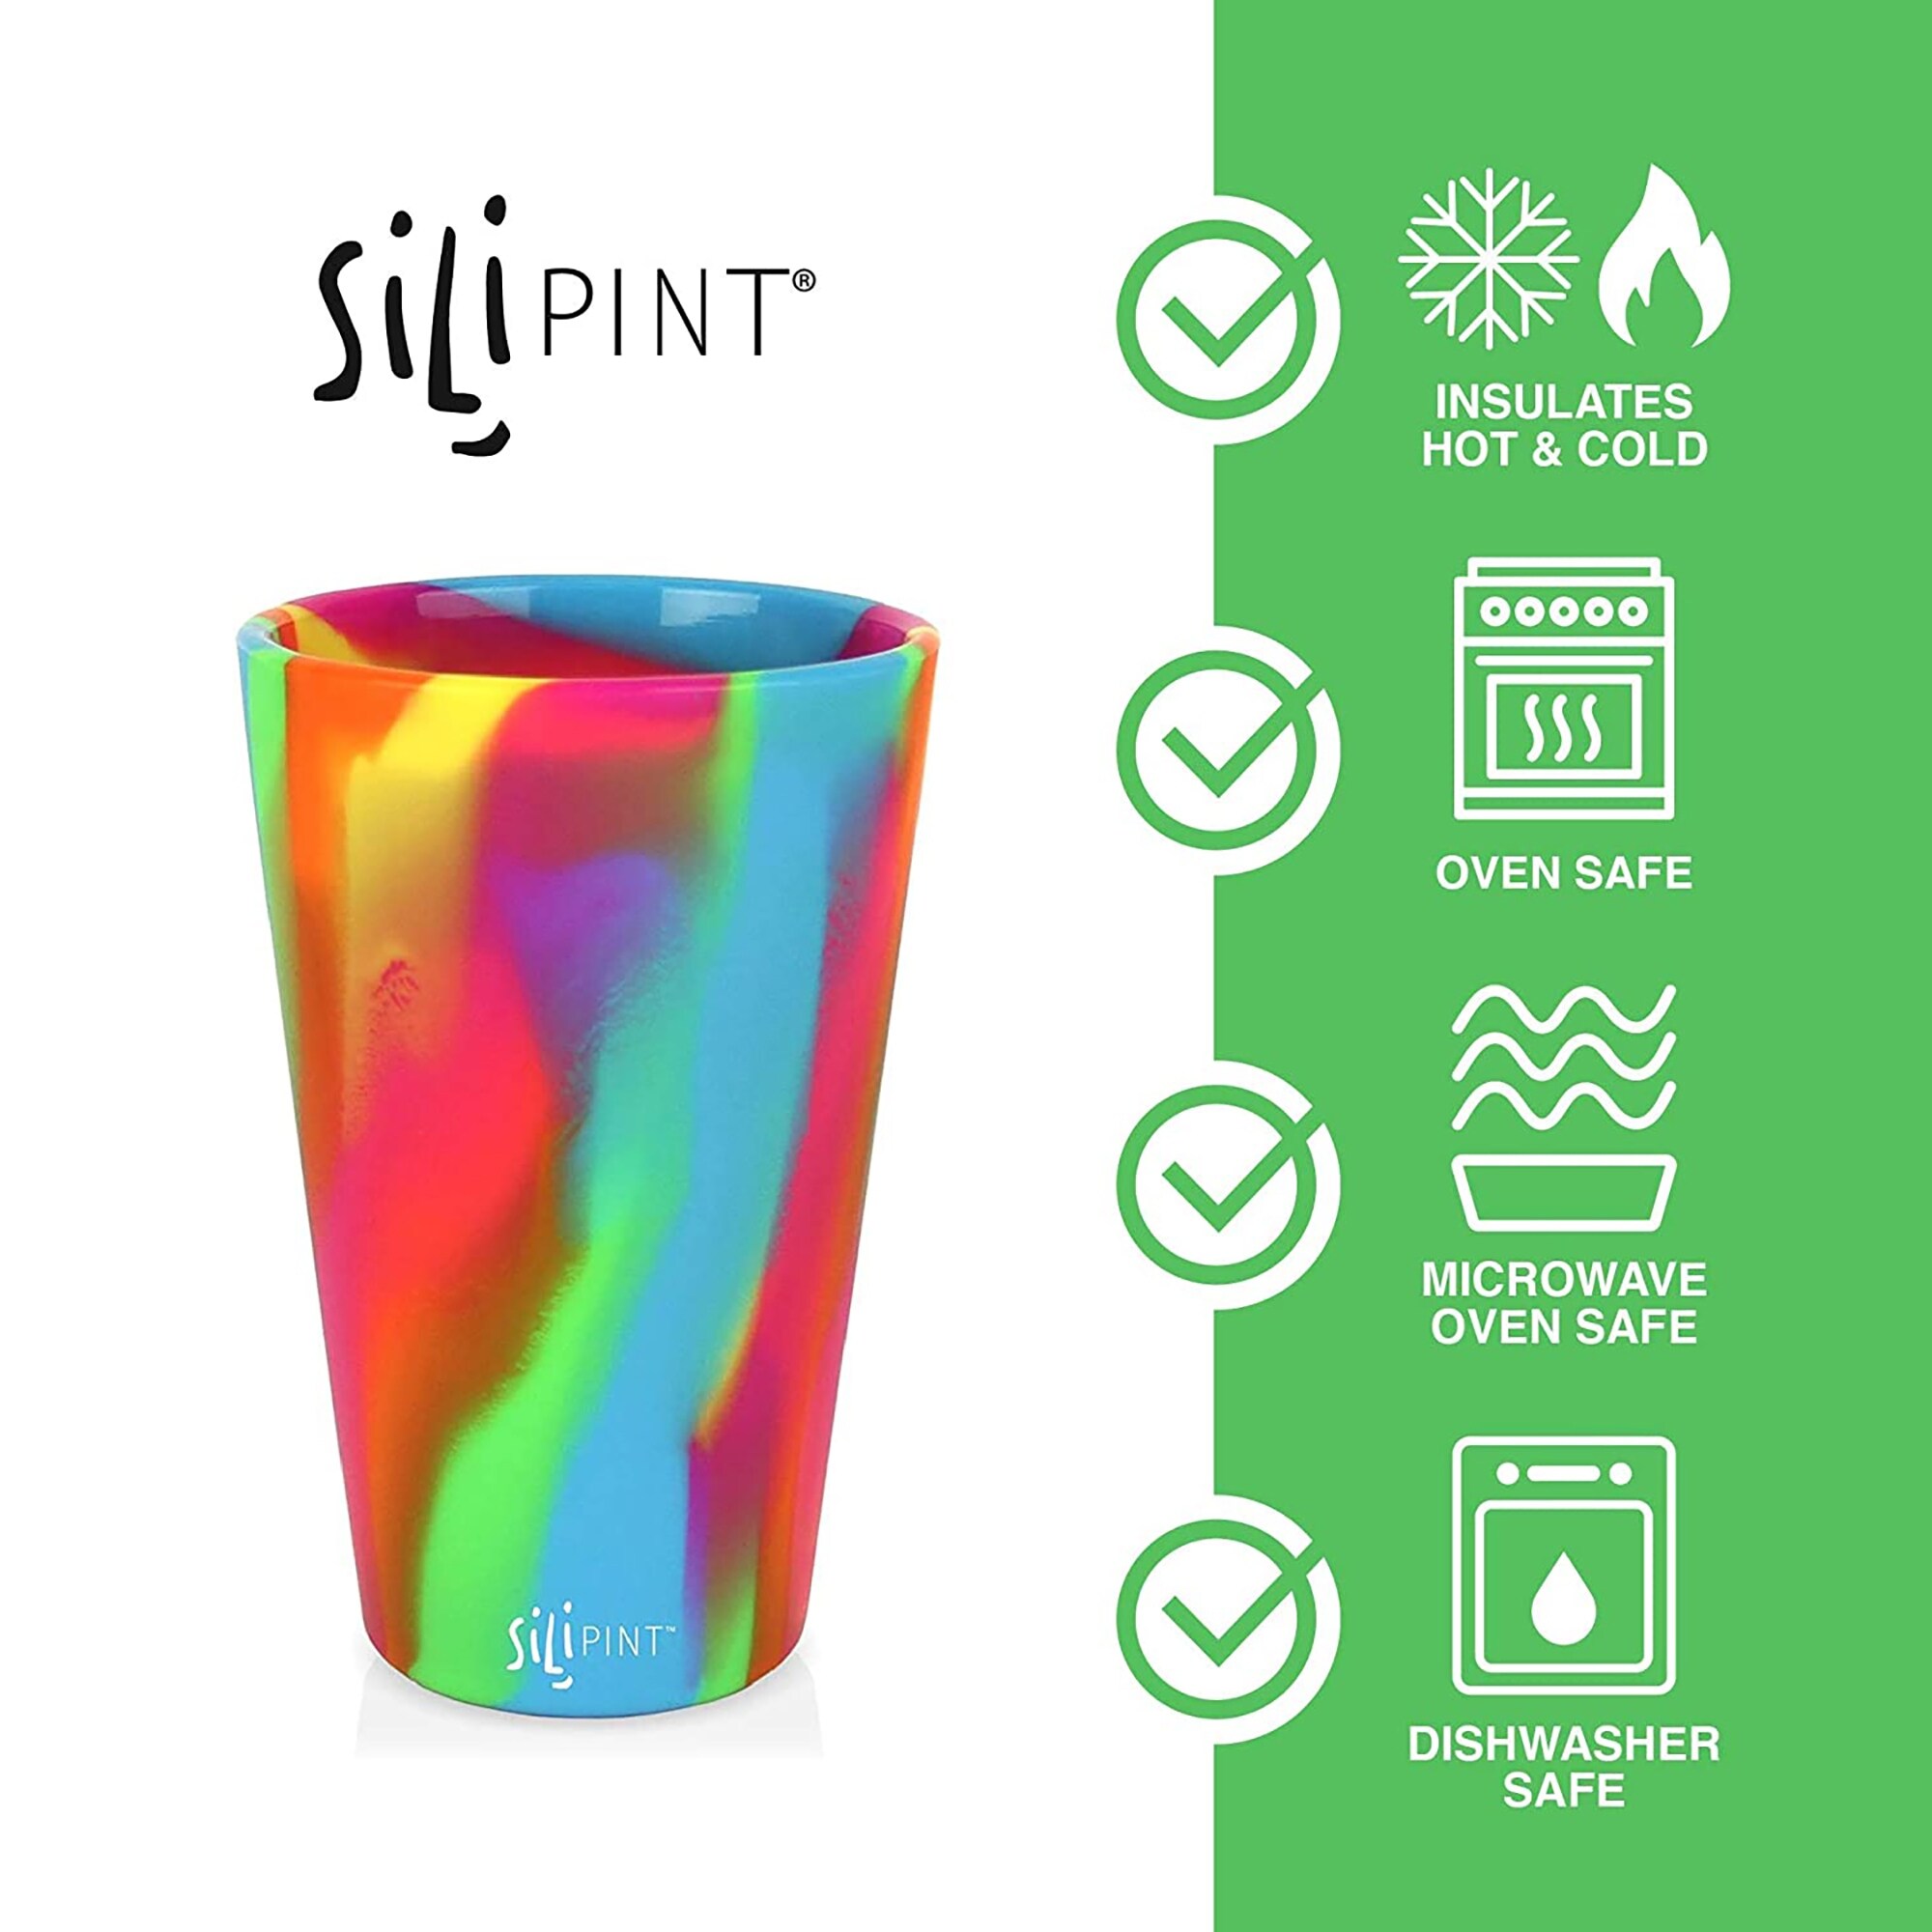 https://ak1.ostkcdn.com/images/products/is/images/direct/794fbe3f01a0e082fcf2abdf70aa1beaad782cb8/Silipint%3A-Silicone-Pint-Glasses%3A-4-Pack-Hippie-Hops---16oz-Unbreakable-Cups%2C-Flexible%2C-Hot-Cold%2C-Non-Slip-Easy-Grip.jpg